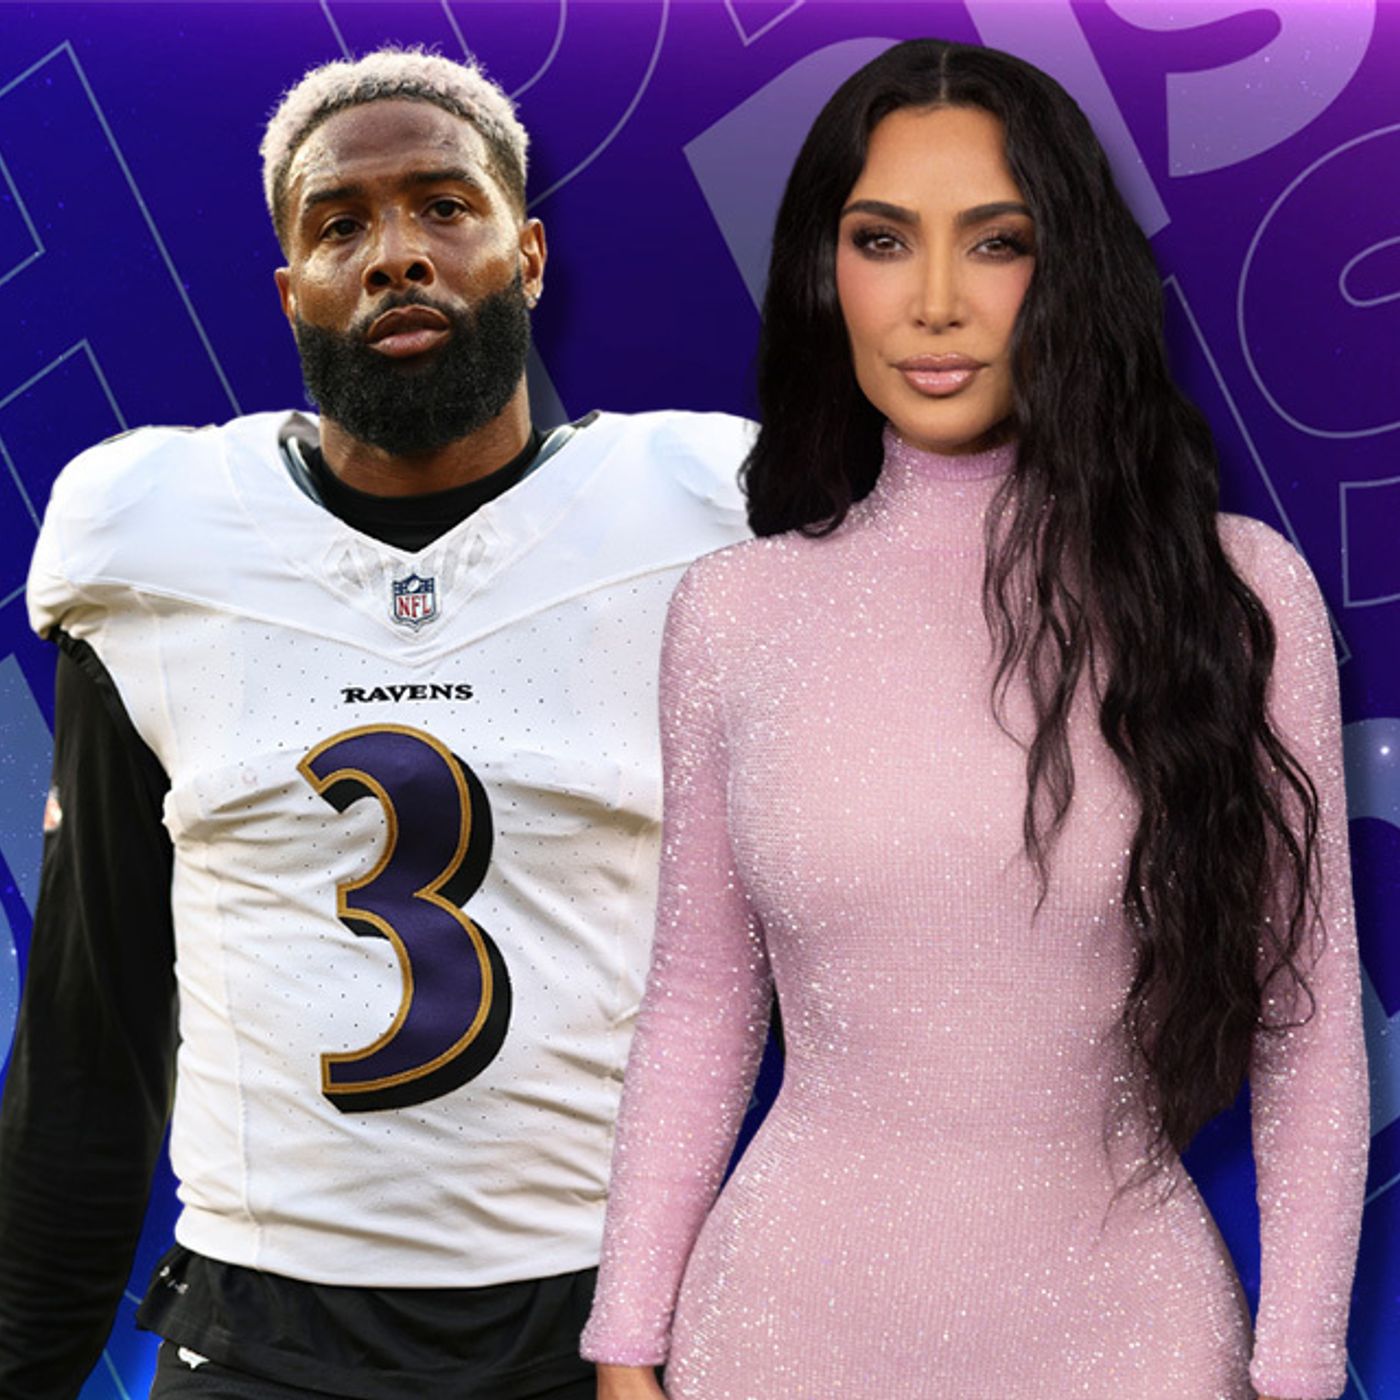 S12 Ep13: 09/20/23 - Kim Kardashian and Odell Beckham Jr. Are ”Hanging Out” & Are Megan Thee Stallion and Justin Timberlake Collaborating?